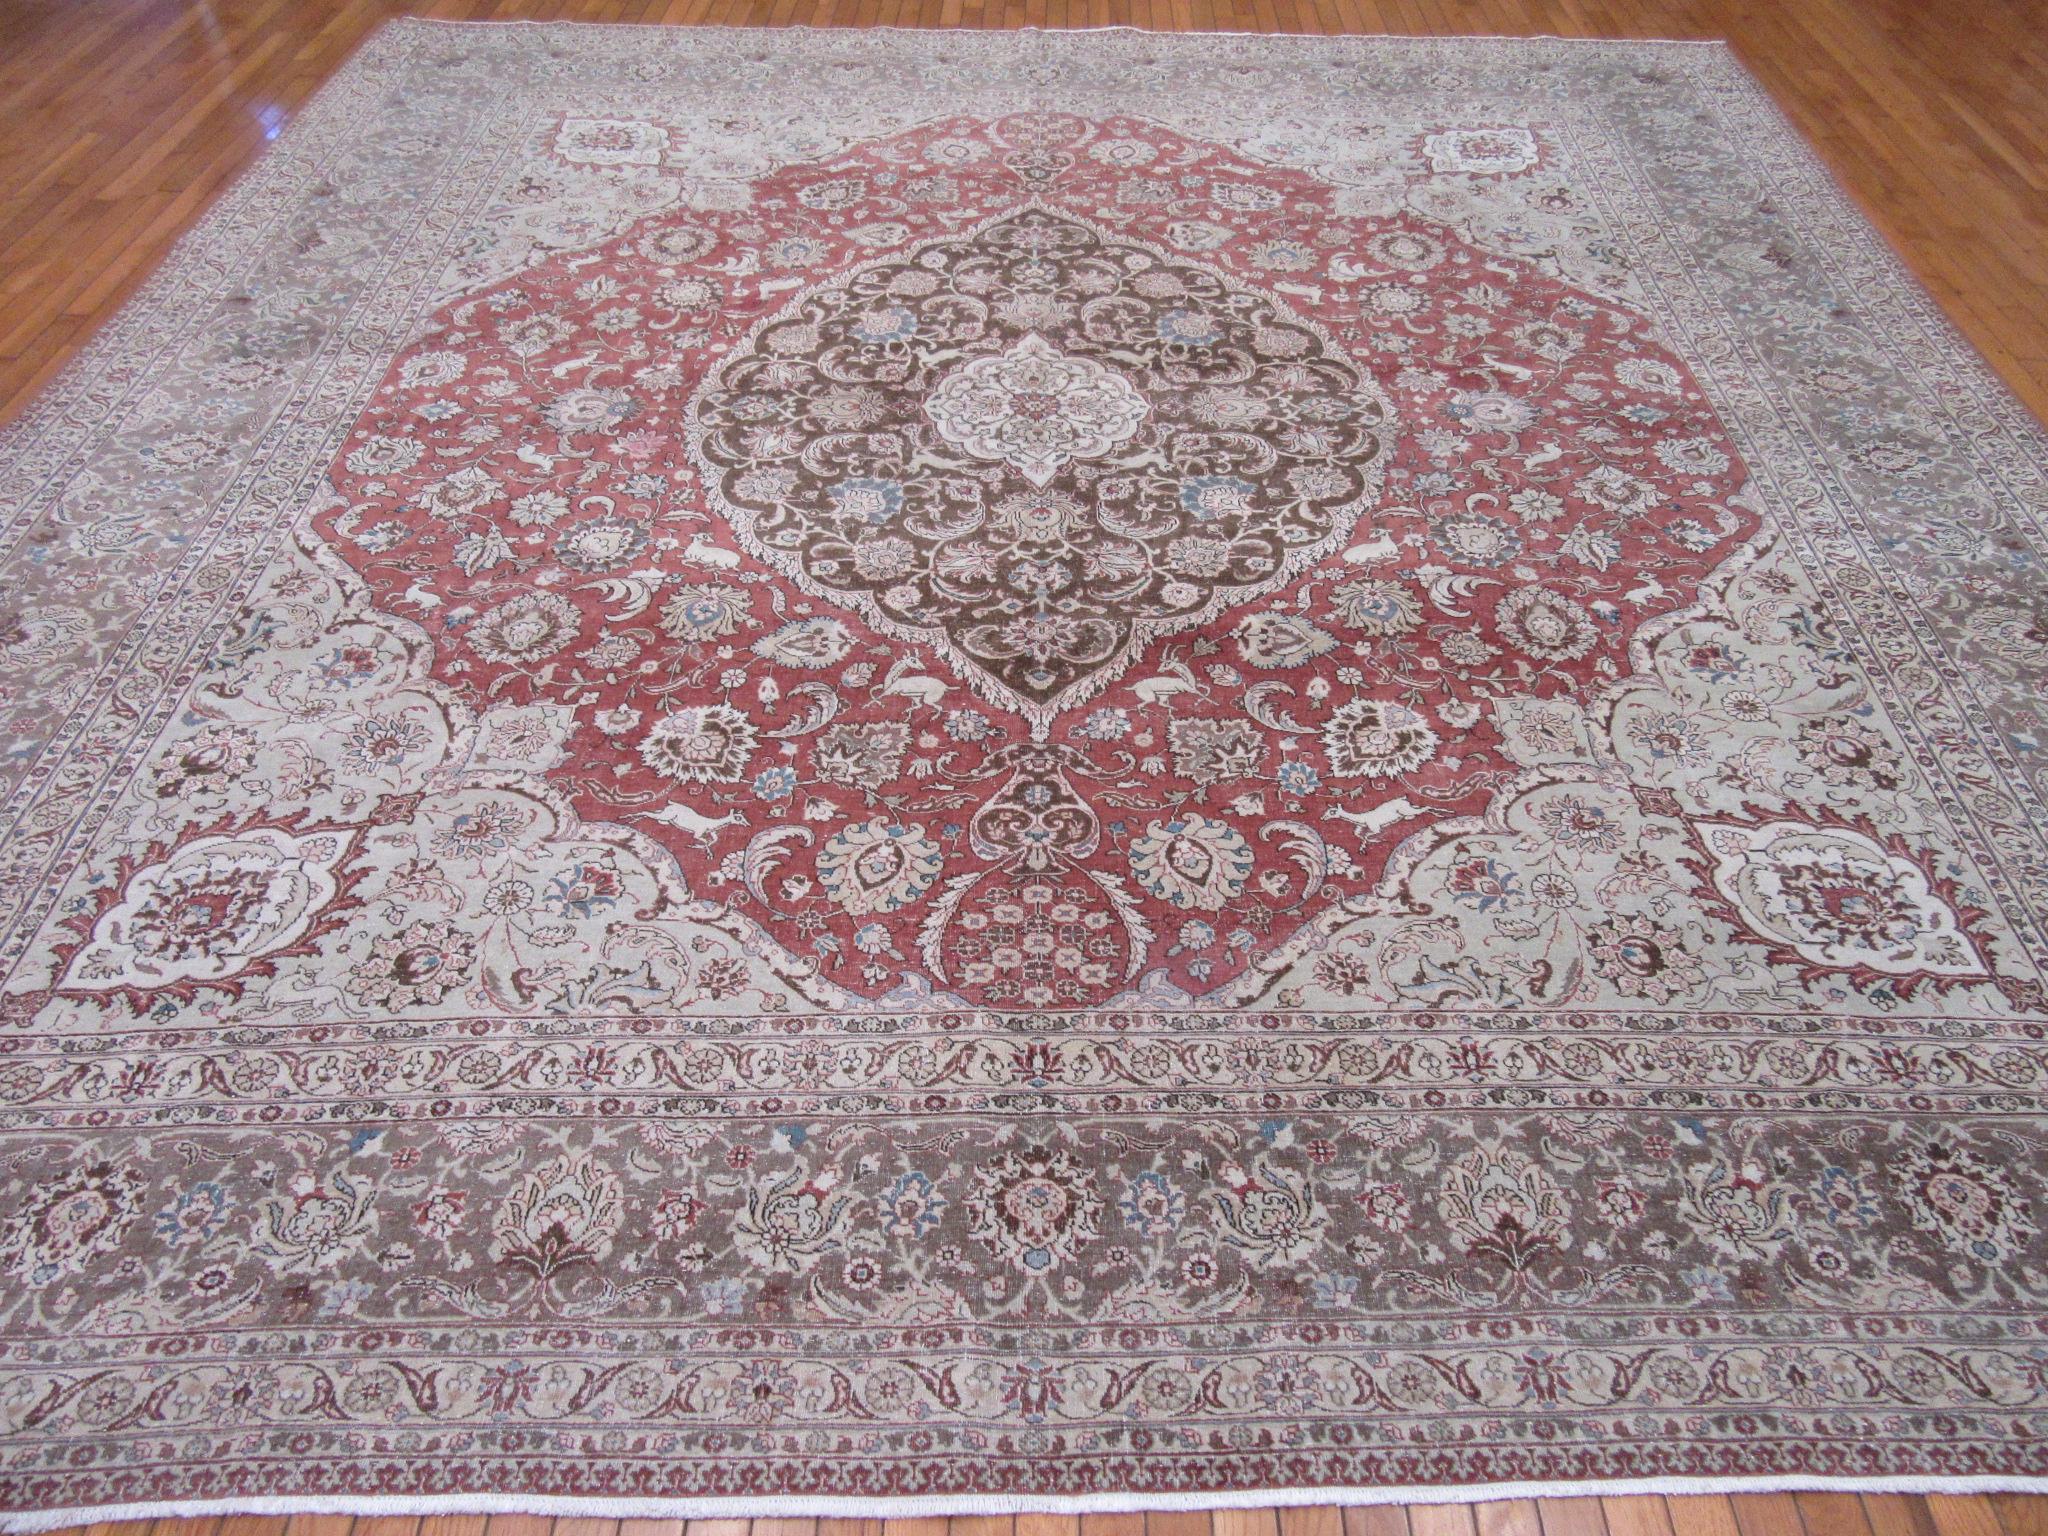 This is an antique hand knotted rug from the city of Tabriz in northwest Iran (Persian) that has been antique washed for softer tones. The rug has a detailed floral pattern with animal motifs on a soft red color field. It is finely hand knotted in